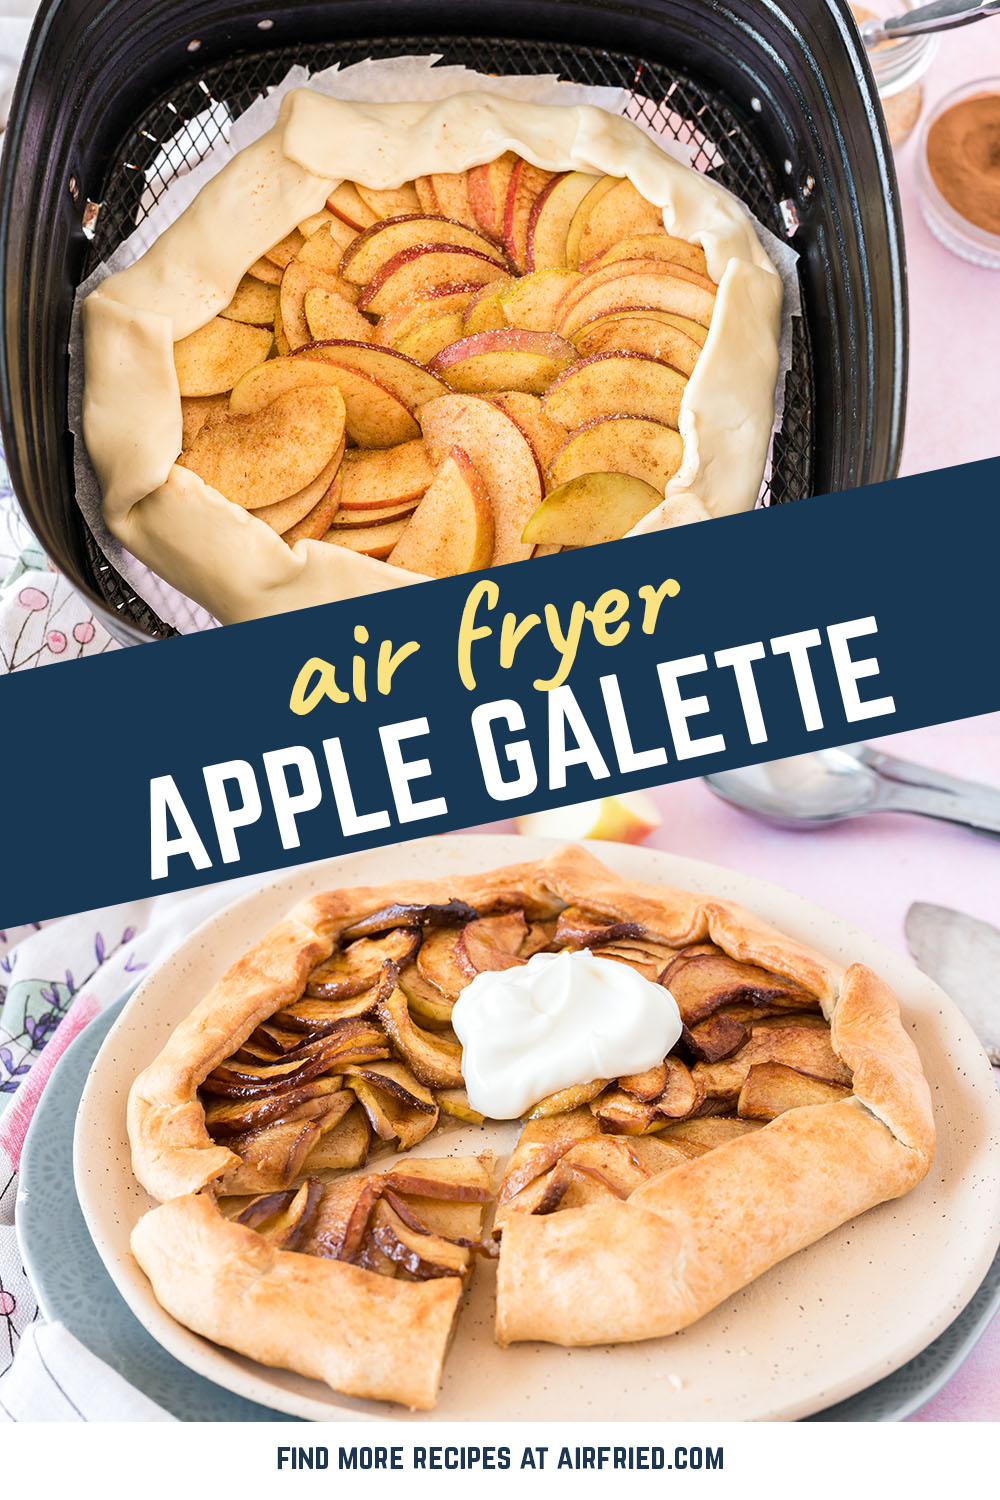 Air fryer apple galette is great served warm and topped with some vanilla ice cream or yogurt.